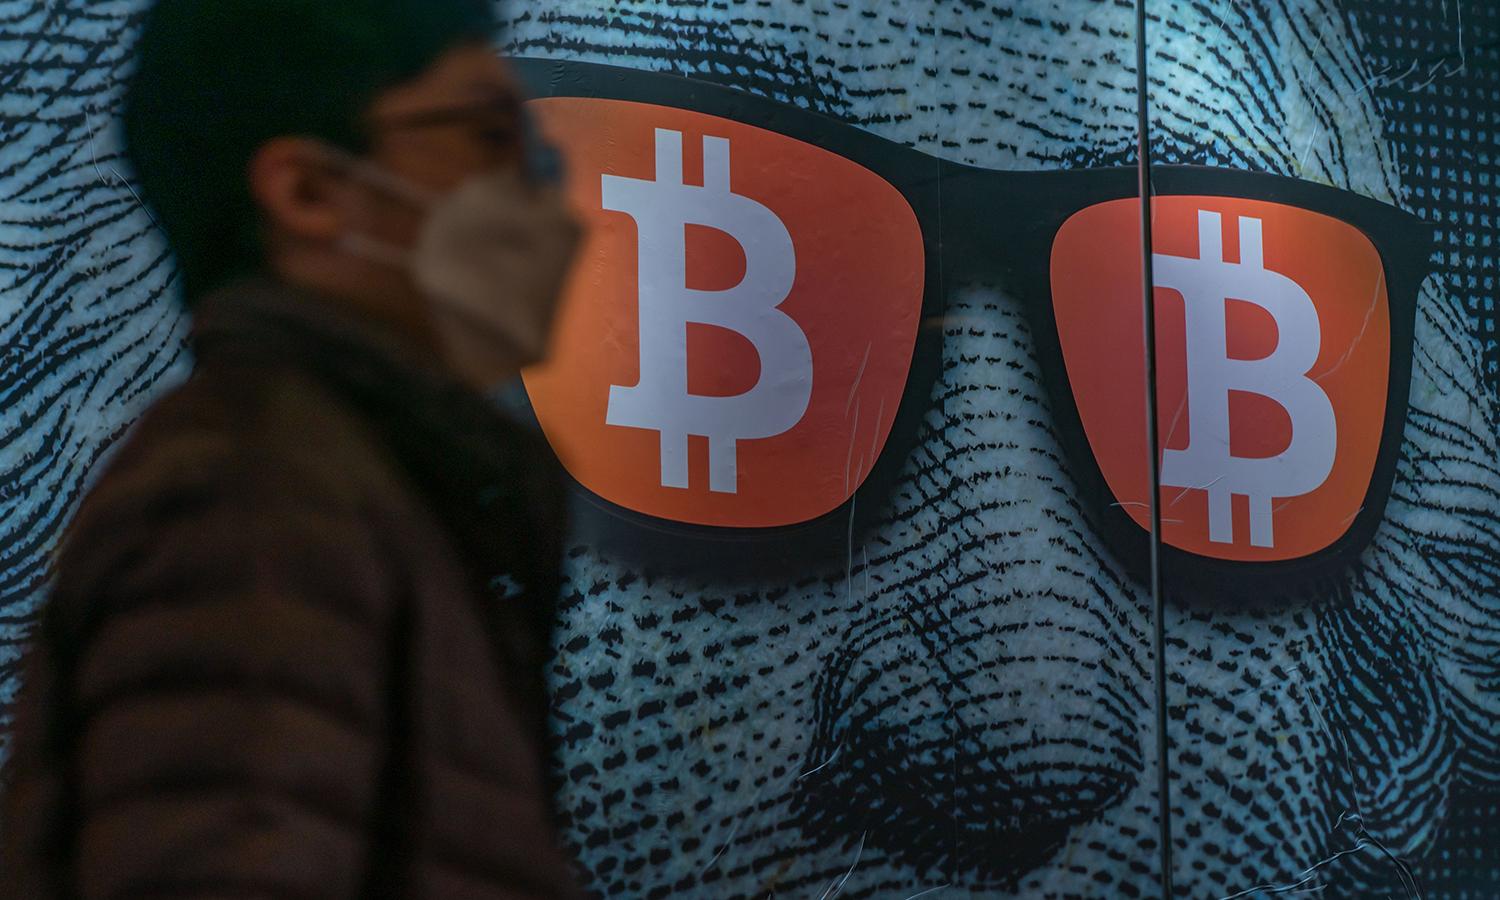 Pedestrians walk past a display of cryptocurrency Bitcoin on Feb. 15, 2022, in Hong Kong. (Photo by Anthony Kwan/Getty Images)